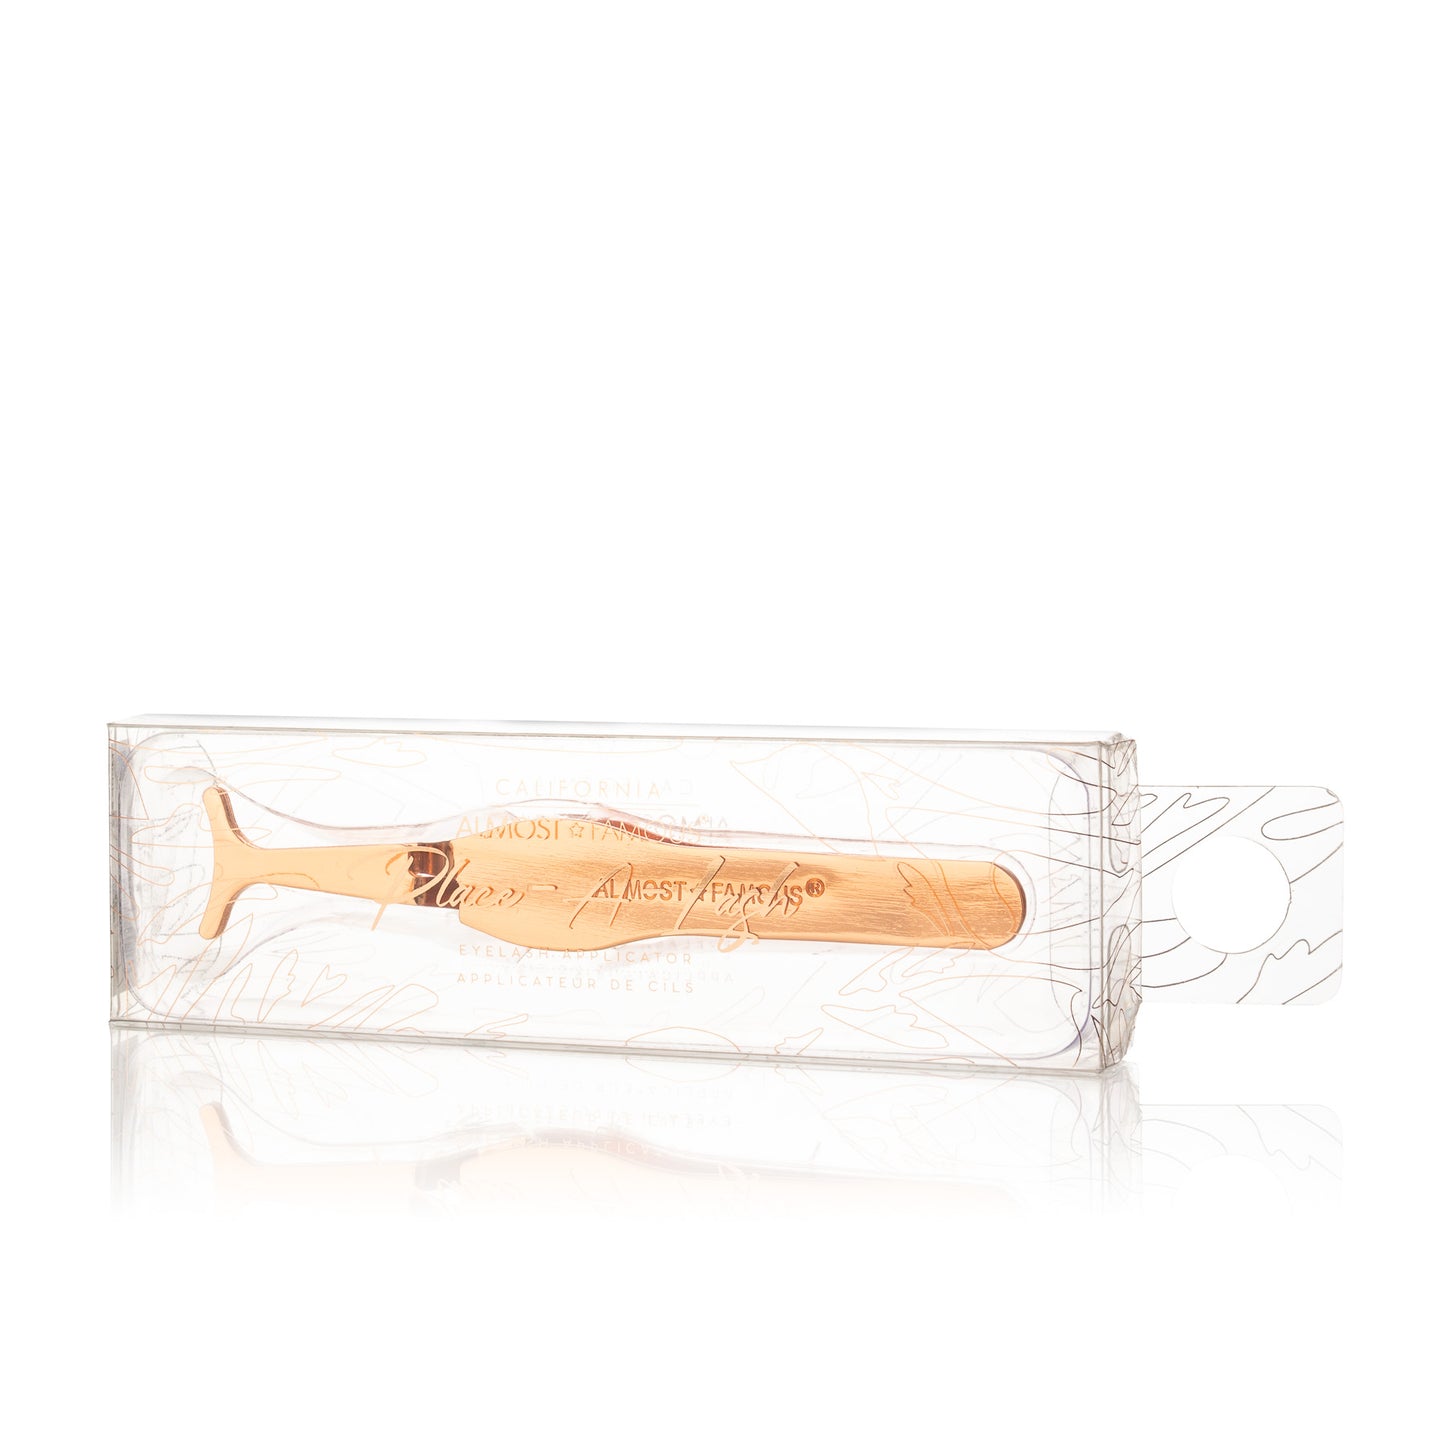 Magnetic Eyelash Applicator Tweezers - Rose Gold By Almost Famous